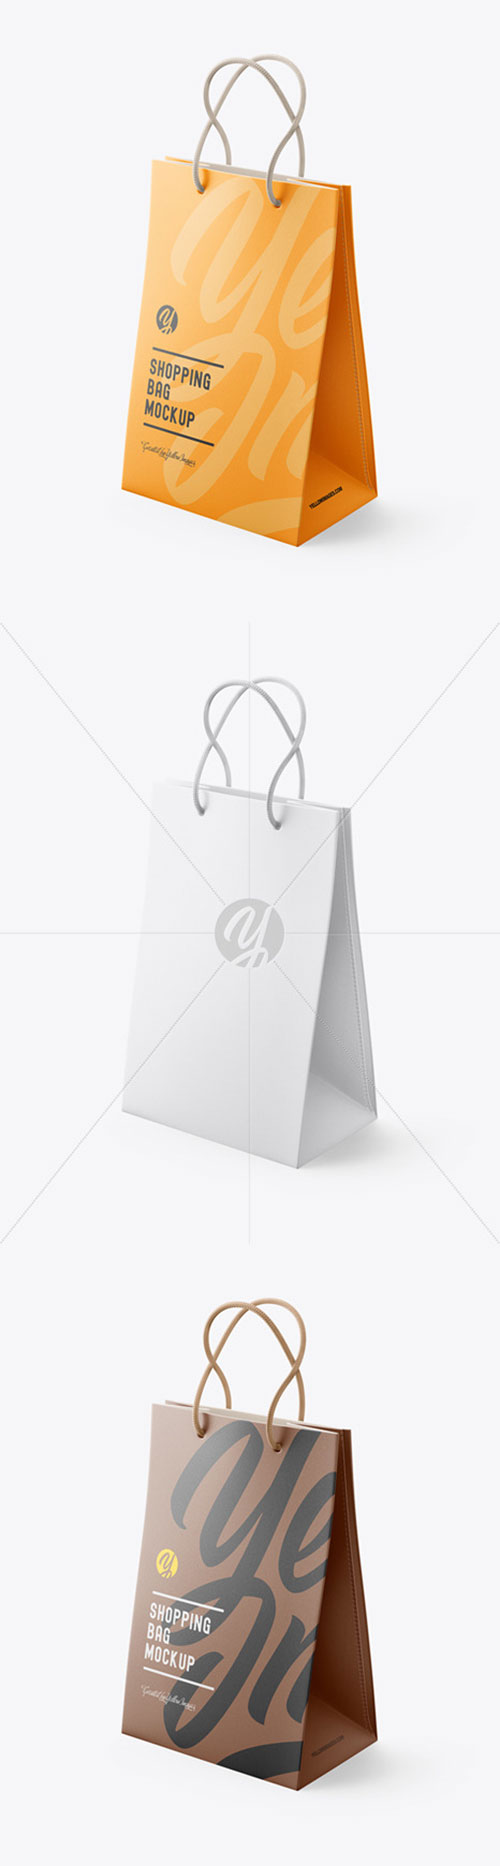 Luxury Leather Shopping Bag With Handles mockup 72210